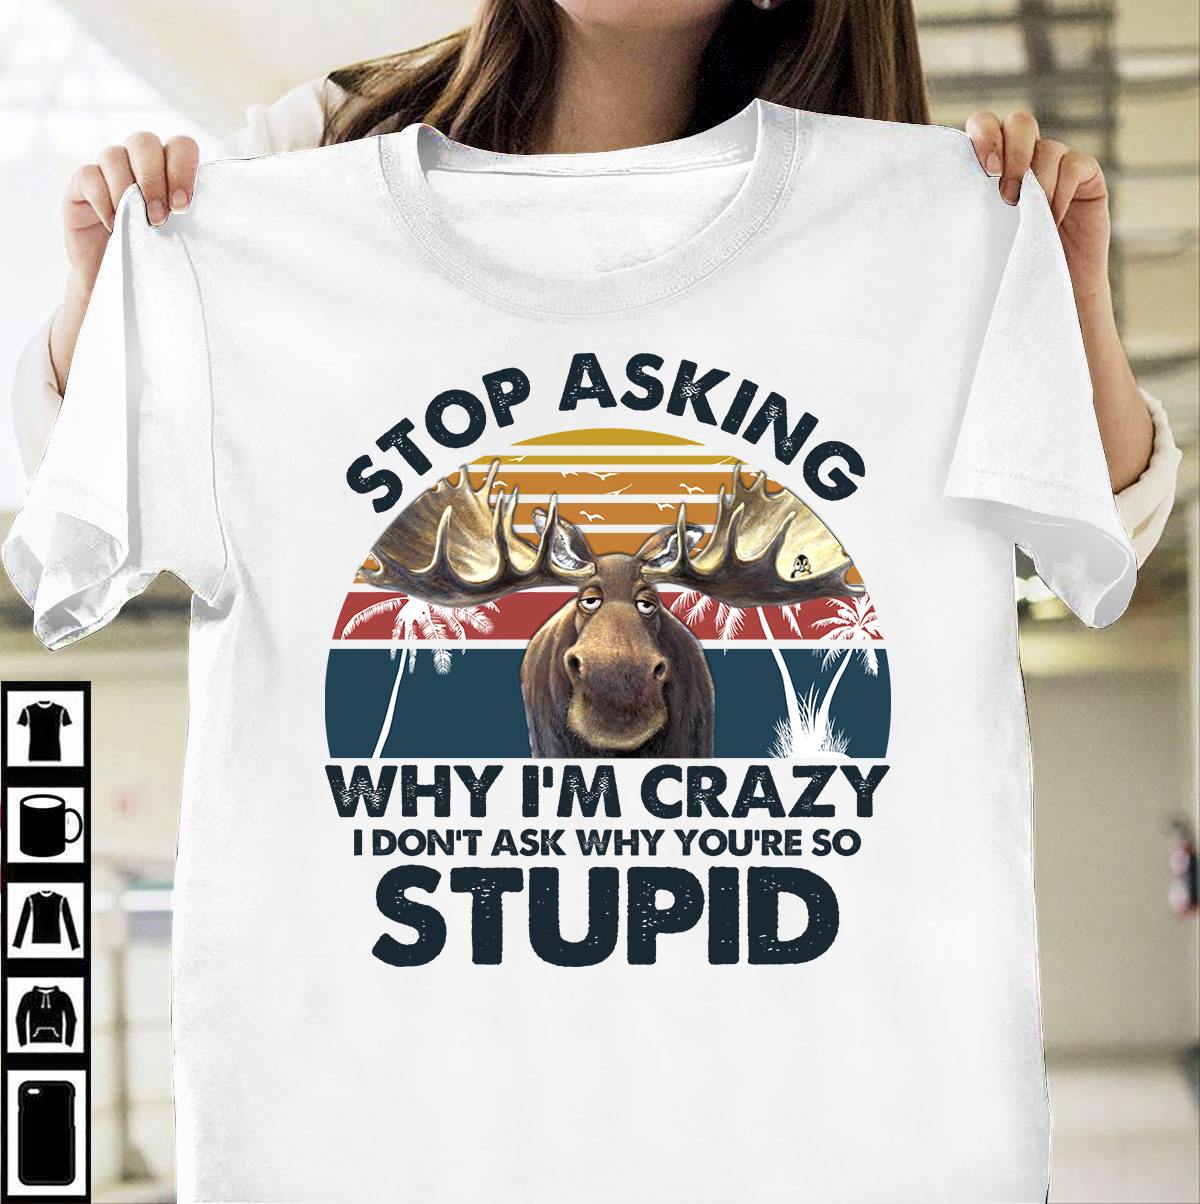 Stop asking why i'm crazy I don't ask why you're so stupid - Reindeer